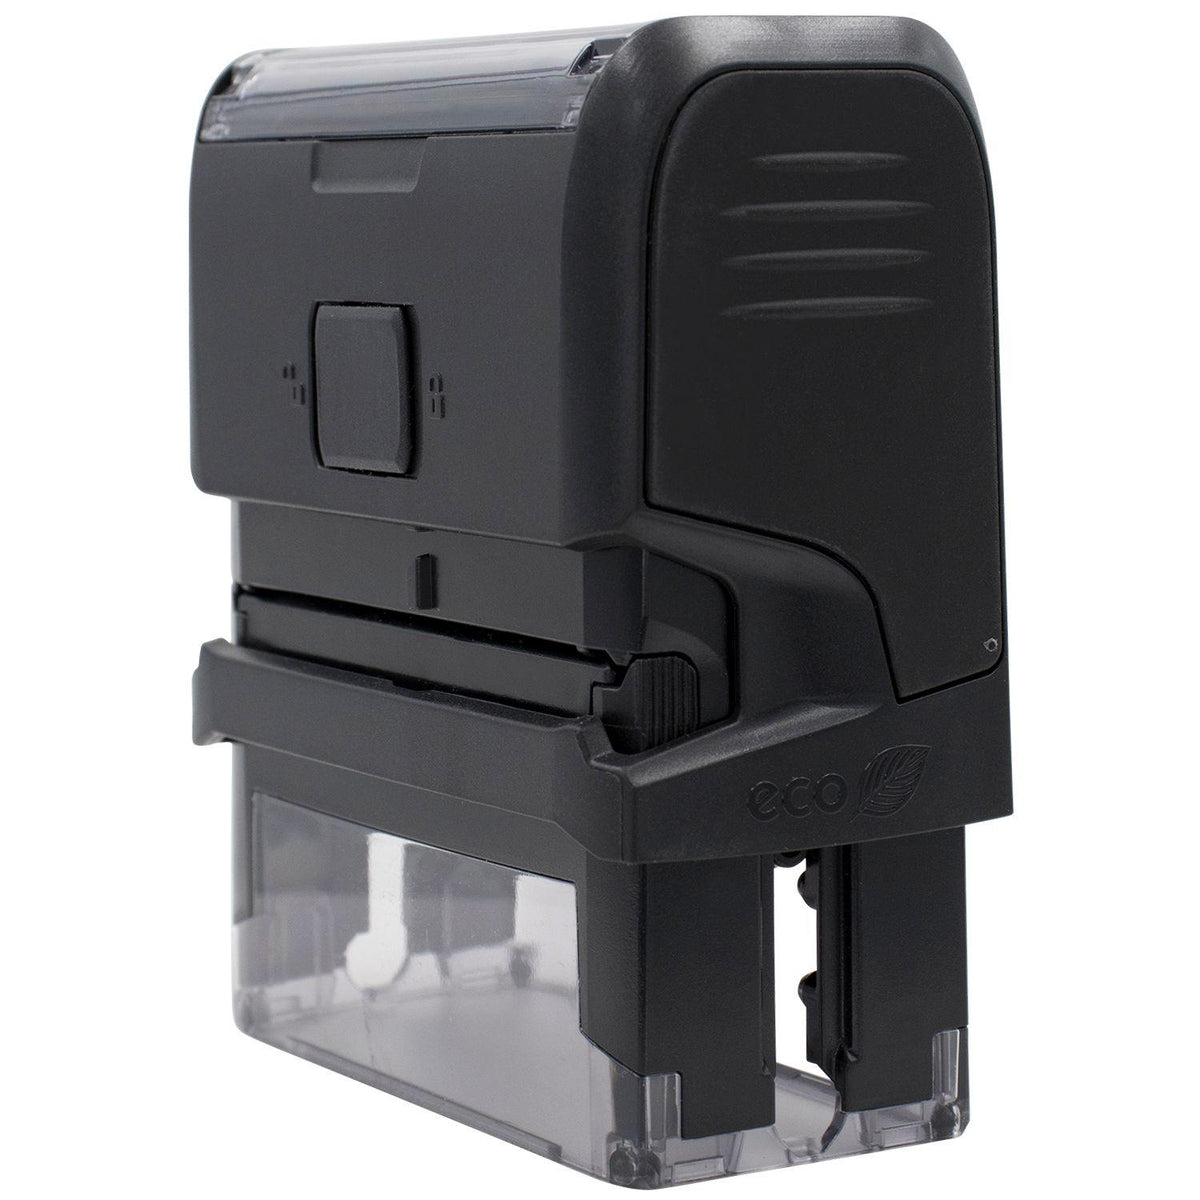 Side View of Large Self-Inking Bold Covid-19 Stamp at an Angle